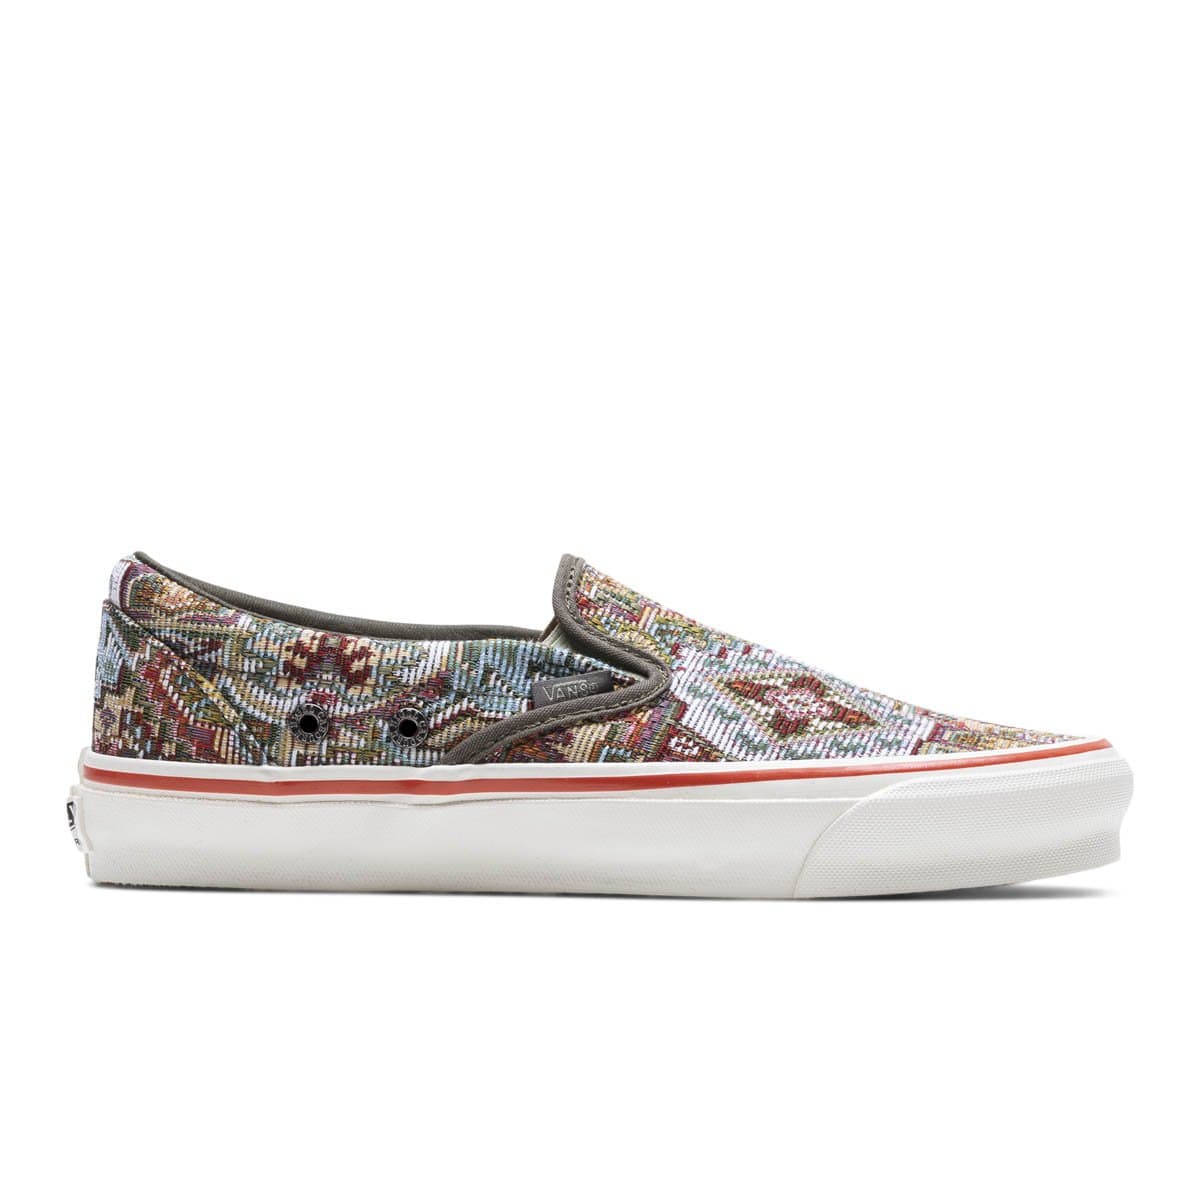 Vault by Vans Casual x Nigel Cabourn CLASSIC SLIP-ON LX